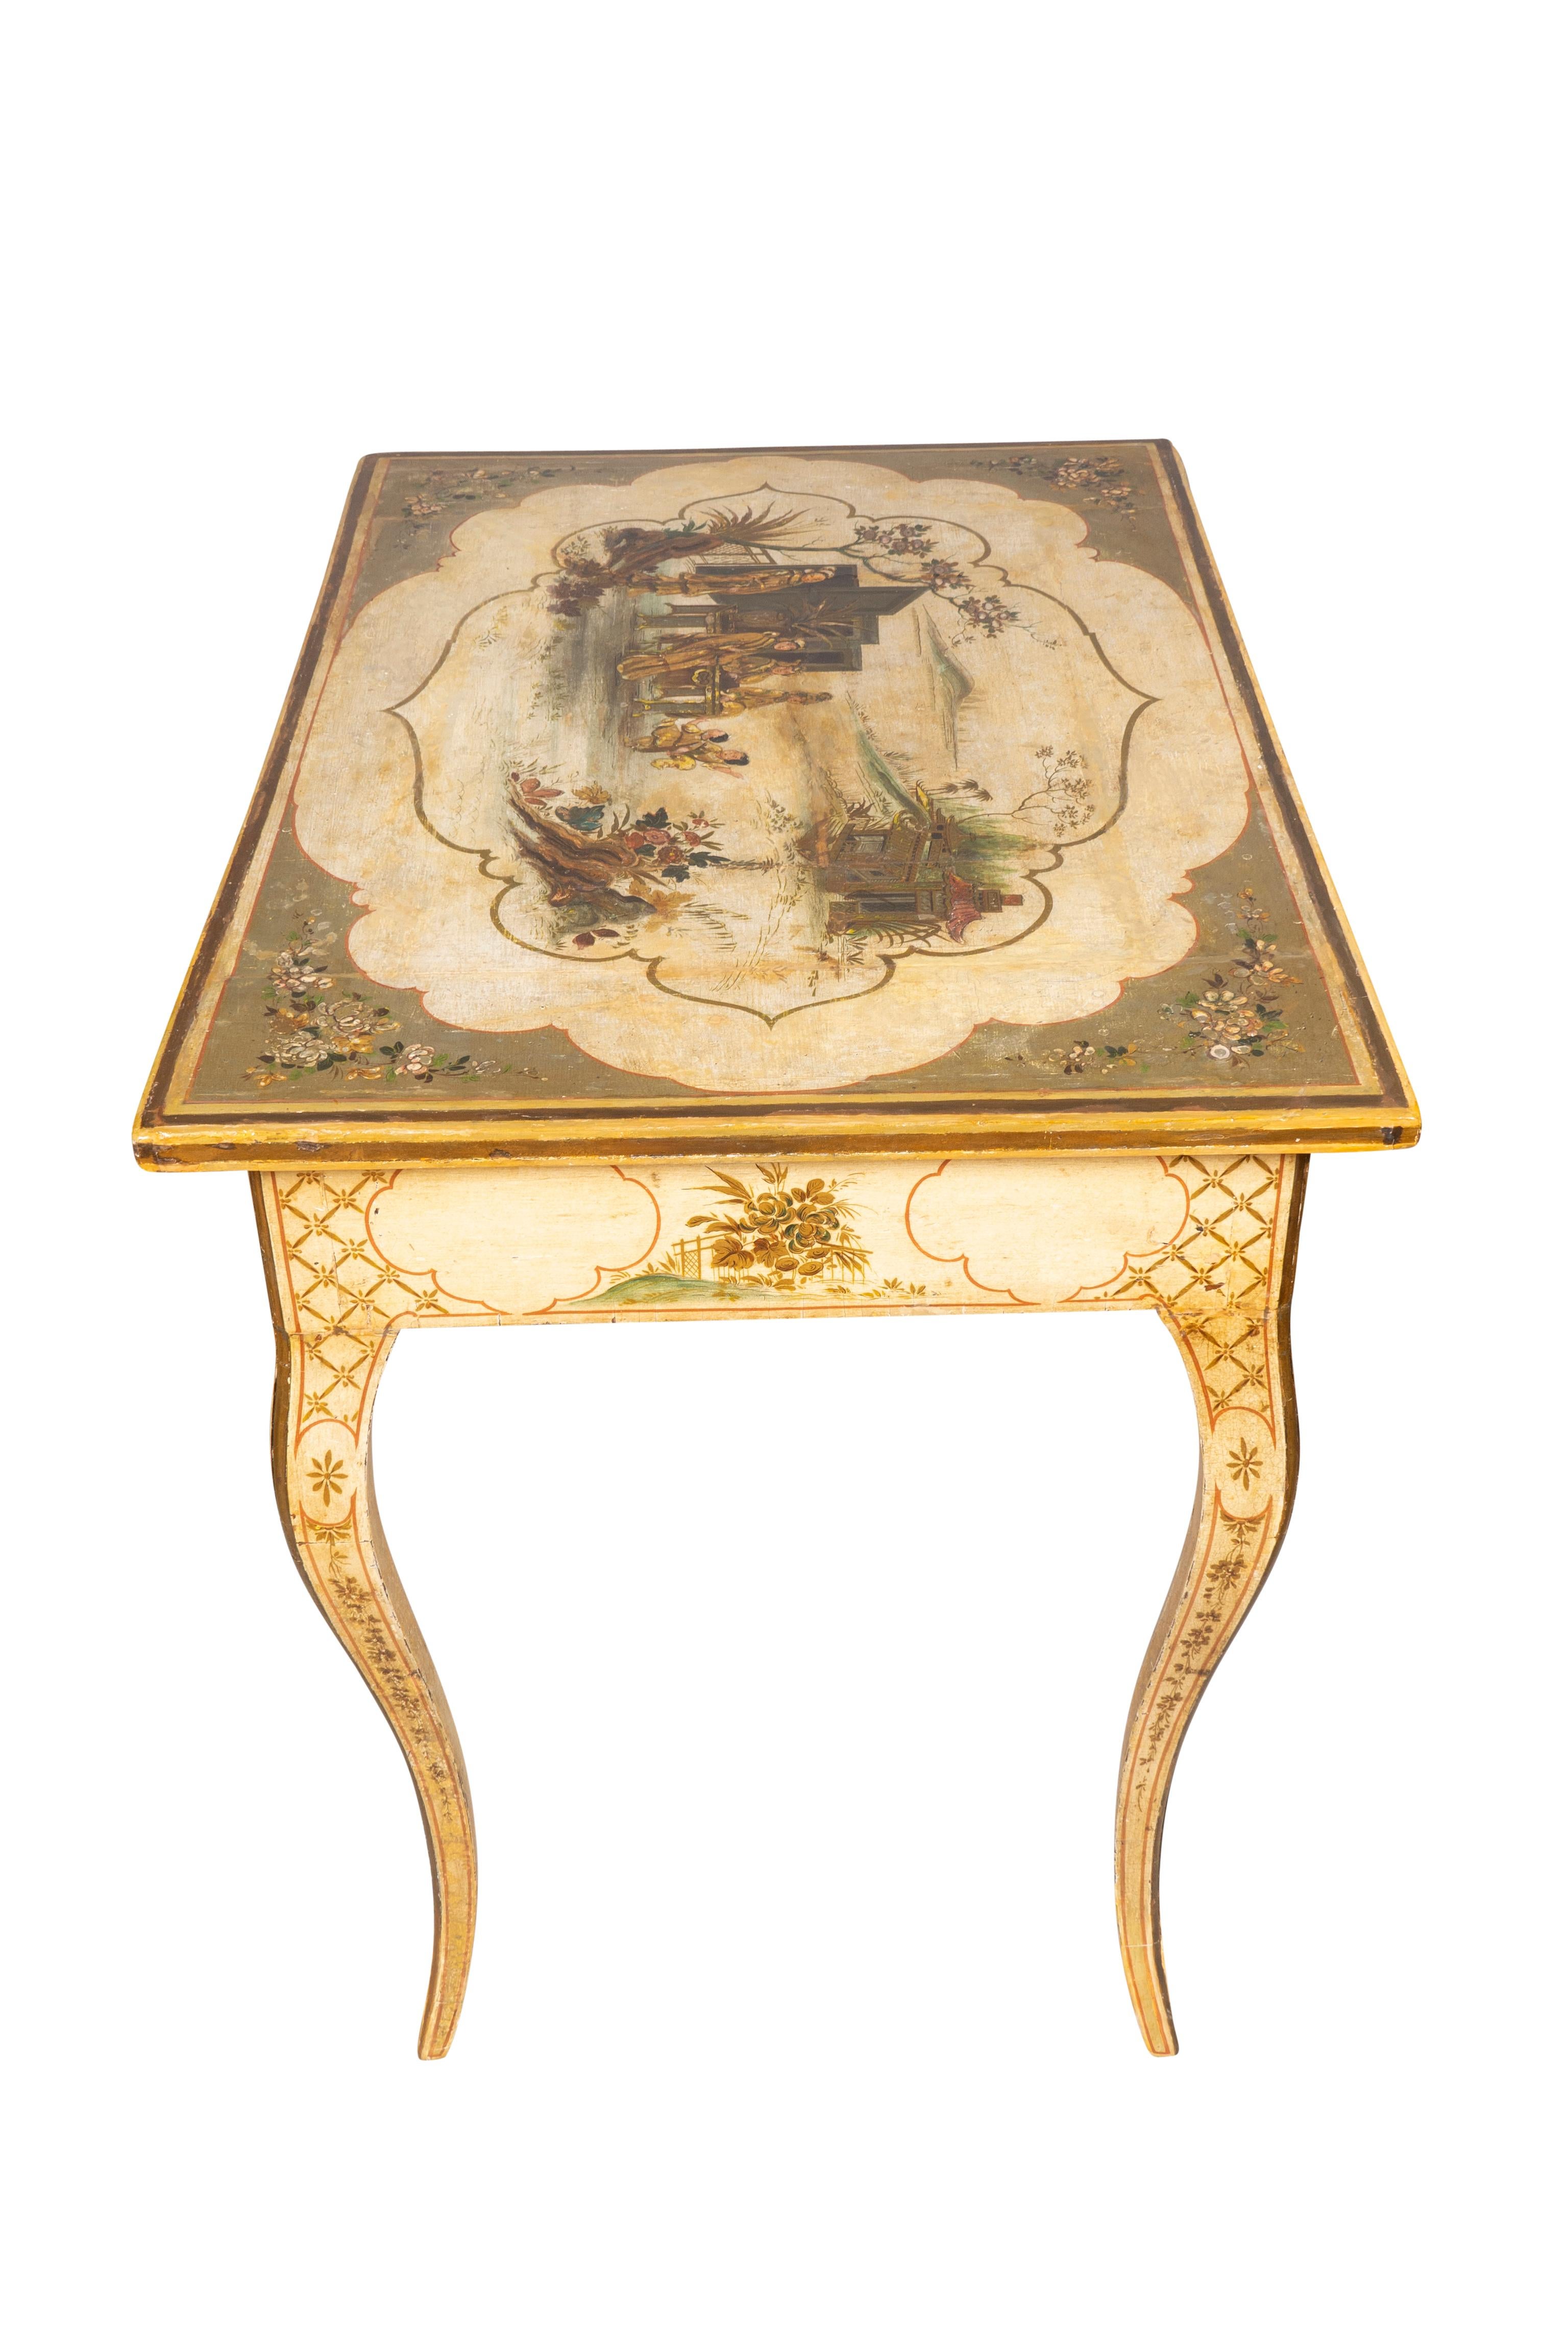 Italian Rococo Chinoiserie Decorated Table For Sale 1